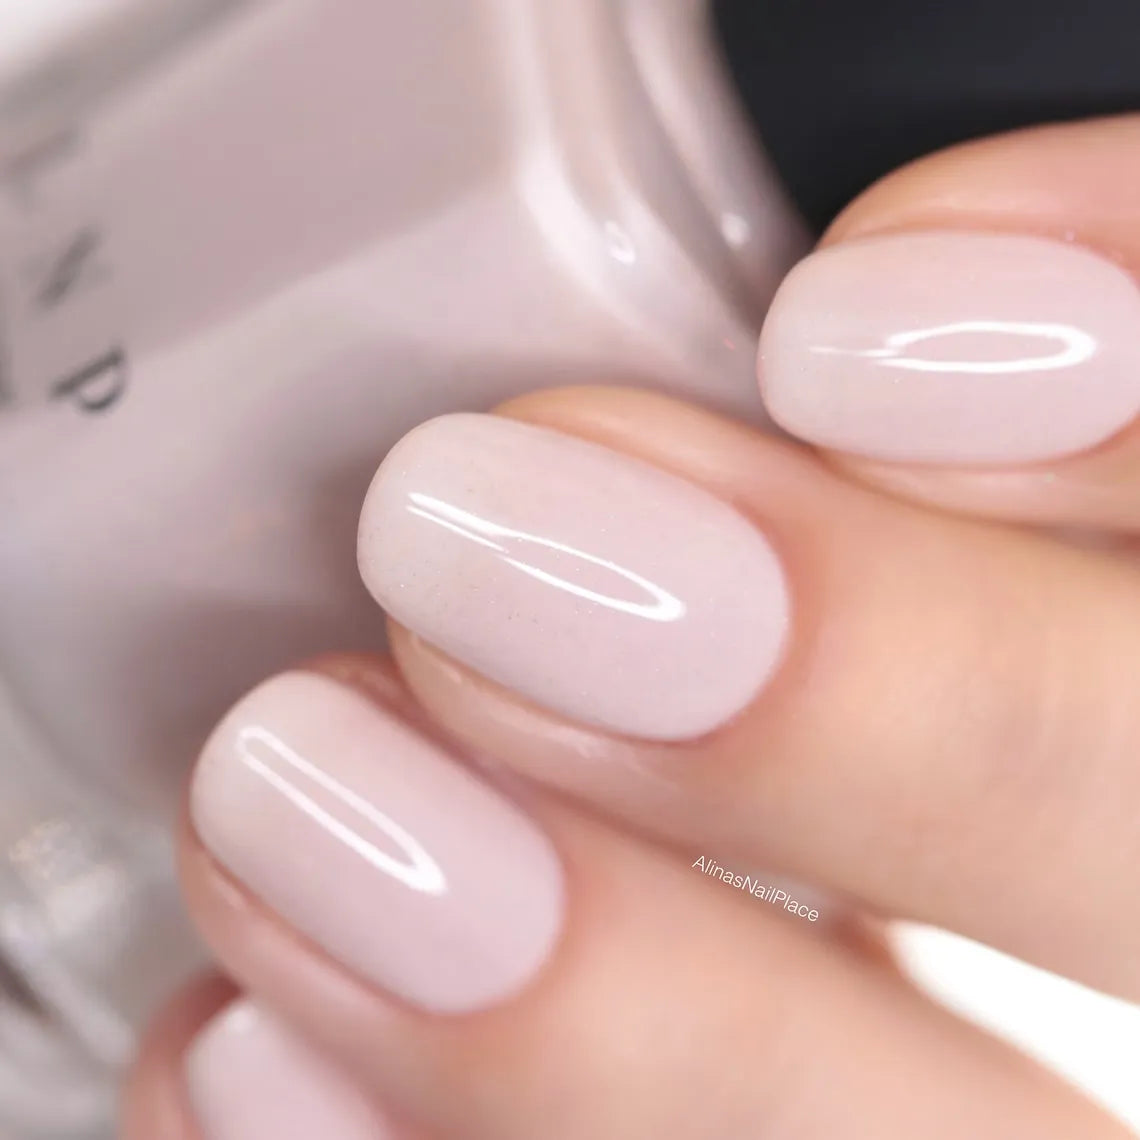 SWATCH & SEE: Etude House Ice Cream Nails ⋆ Beauty Nerd By Night